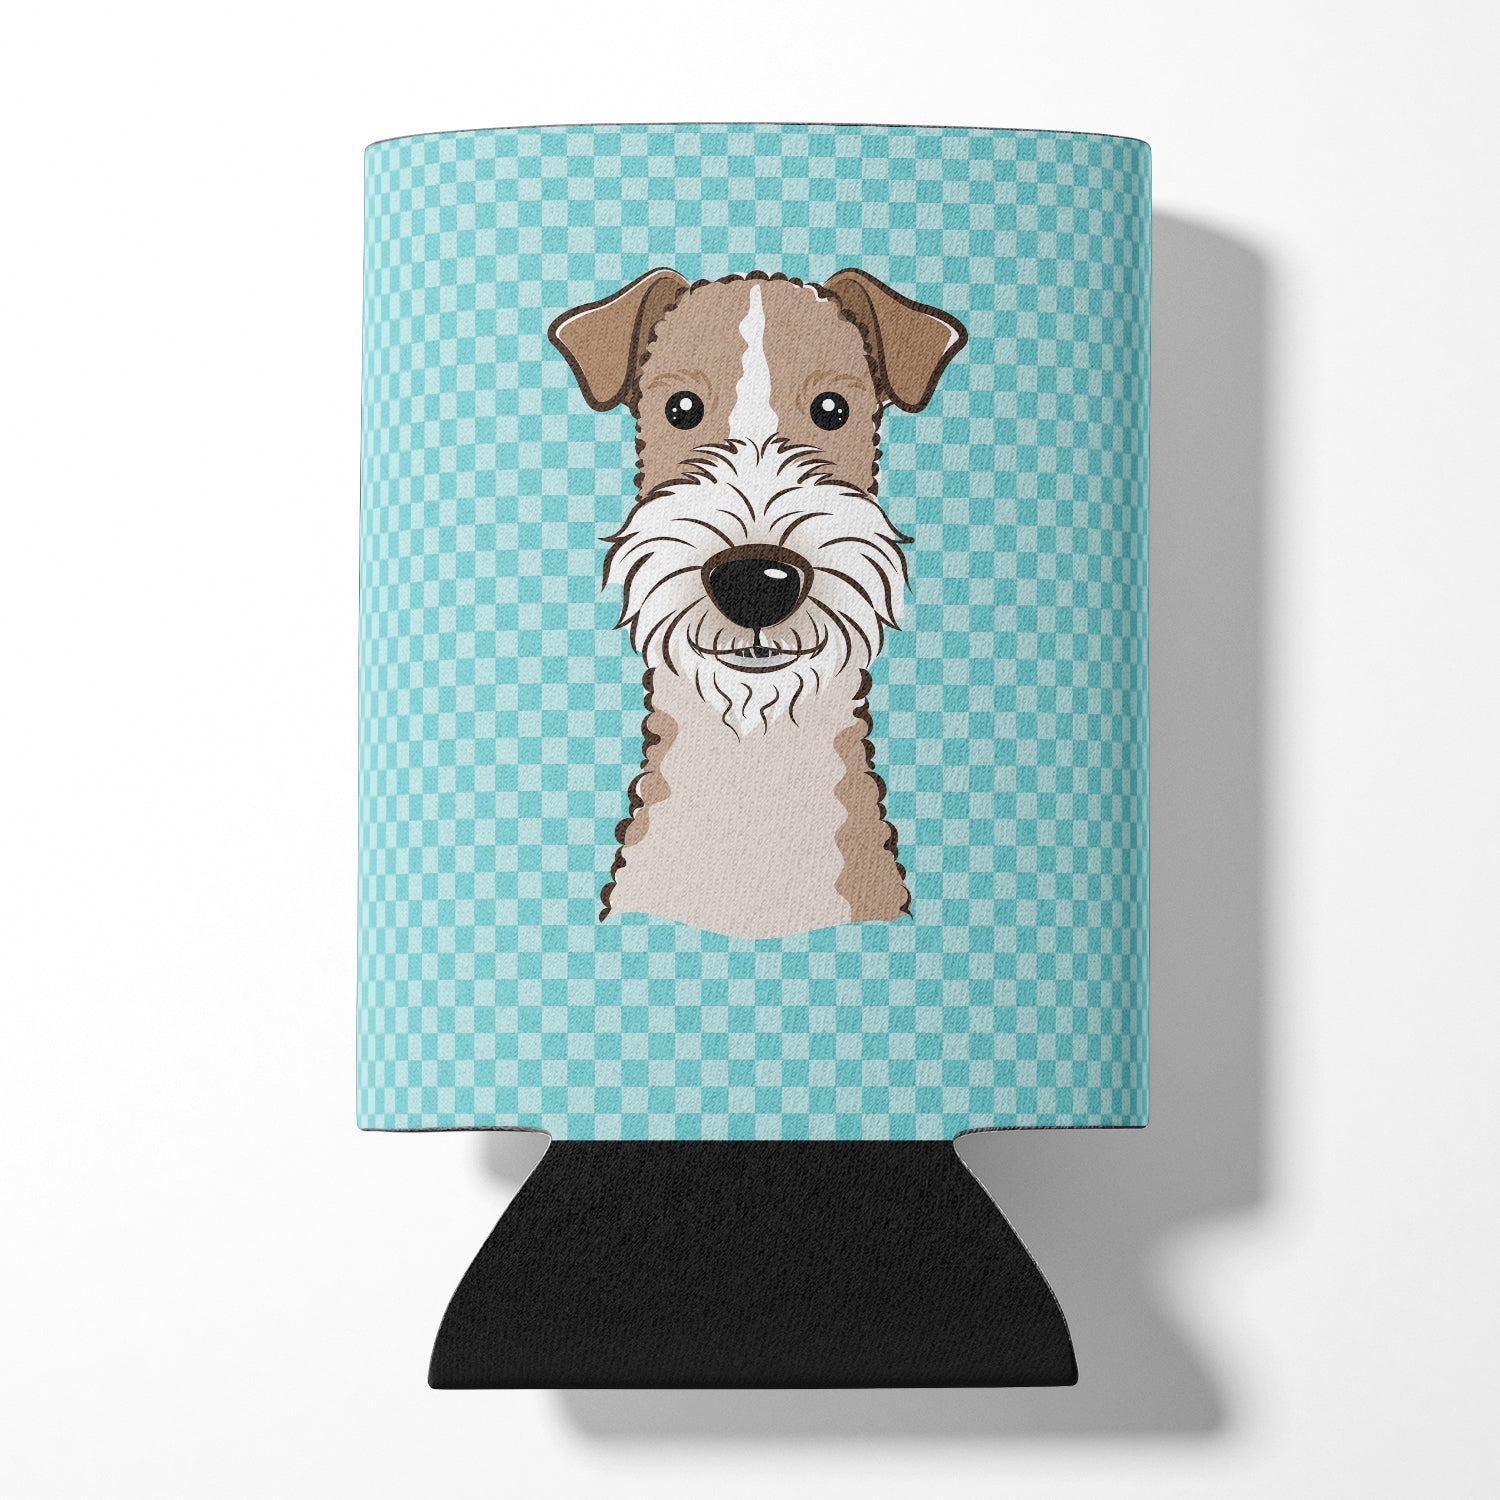 Checkerboard Blue Wire Haired Fox Terrier Can or Bottle Hugger BB1185CC